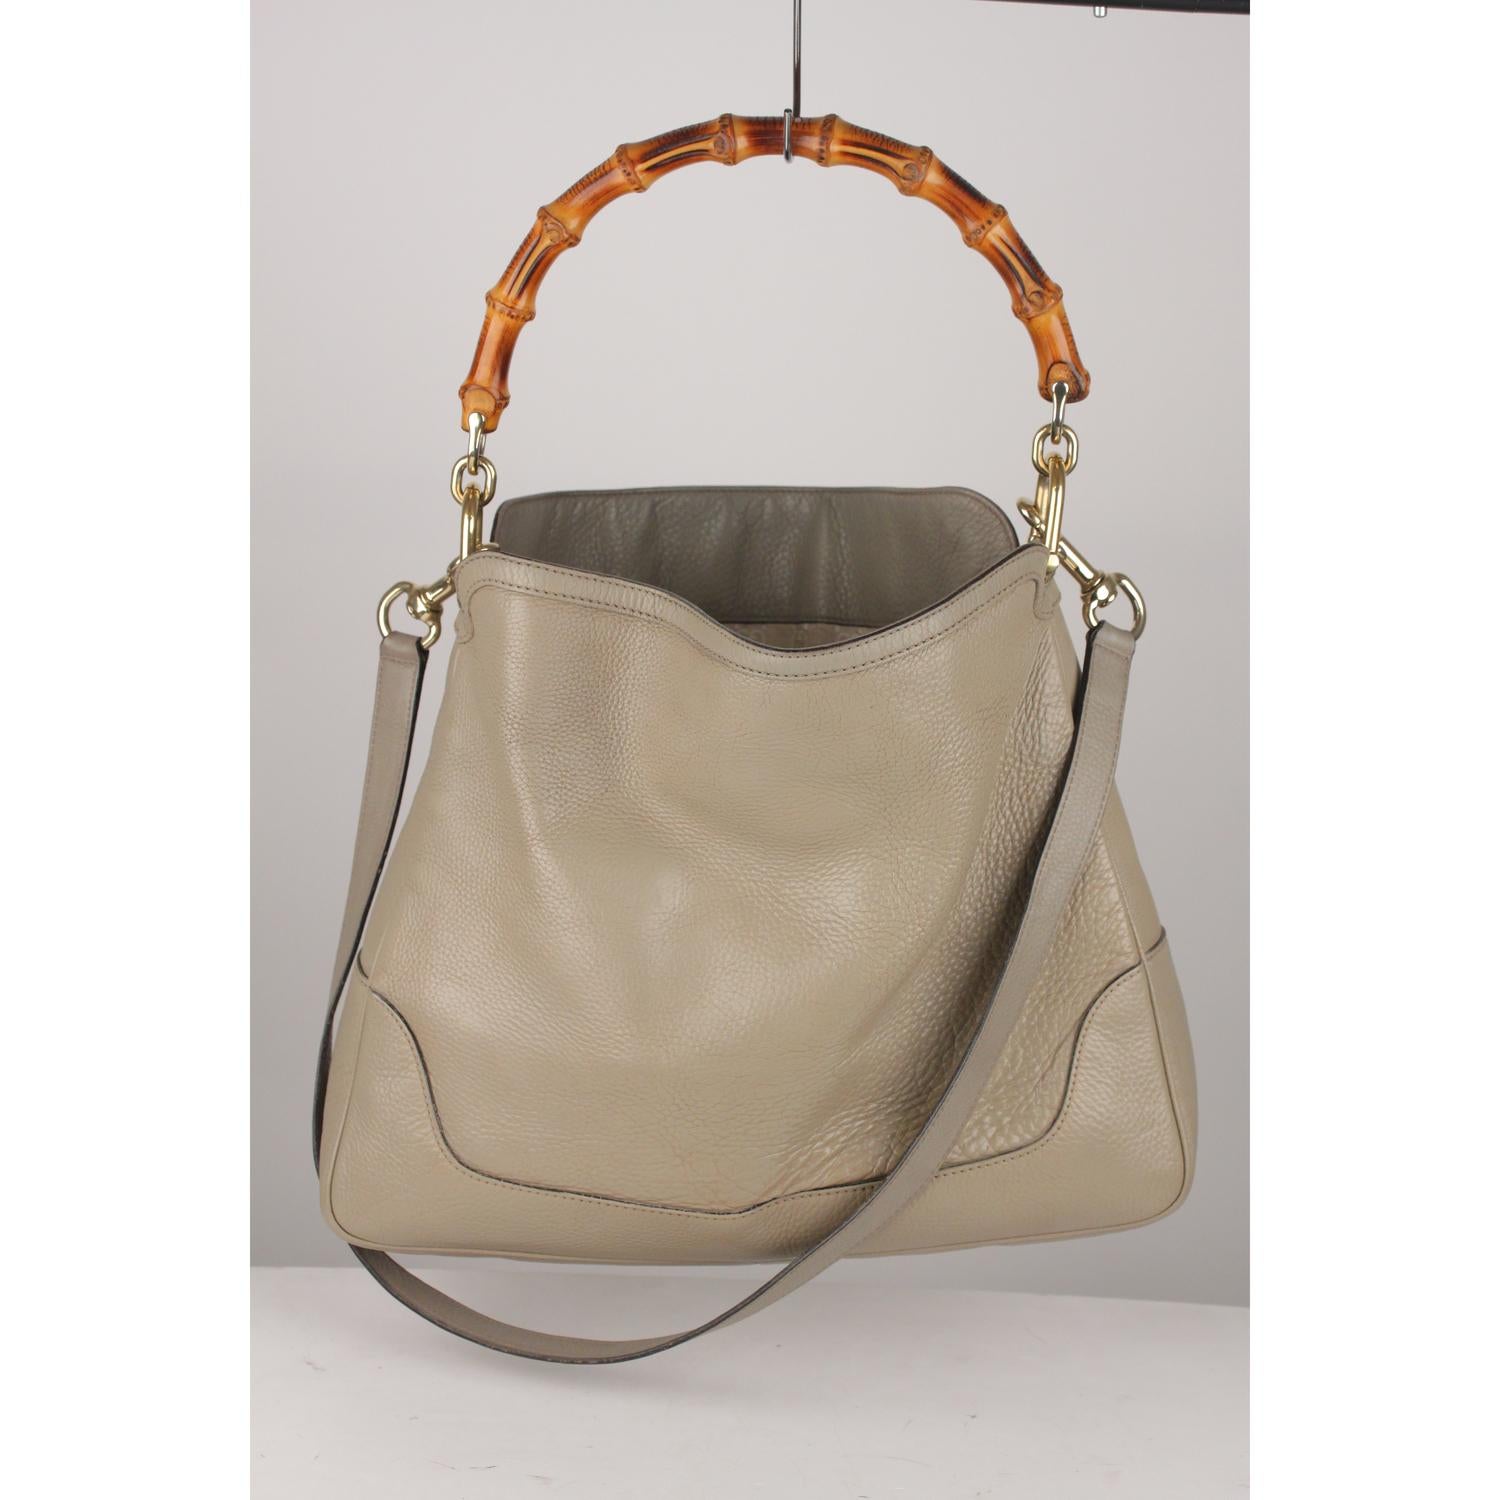 Gucci 'Diana' hobo bag, crafted in taupe genuine leather with bamboo loop handle. Detachable shoulder strap. Gold metal hardware. GG - GUCCi monogram fabric lining with 1 side zip pocket and 2 side open pockets. ' GUCCI - Made in Italy' tag inside